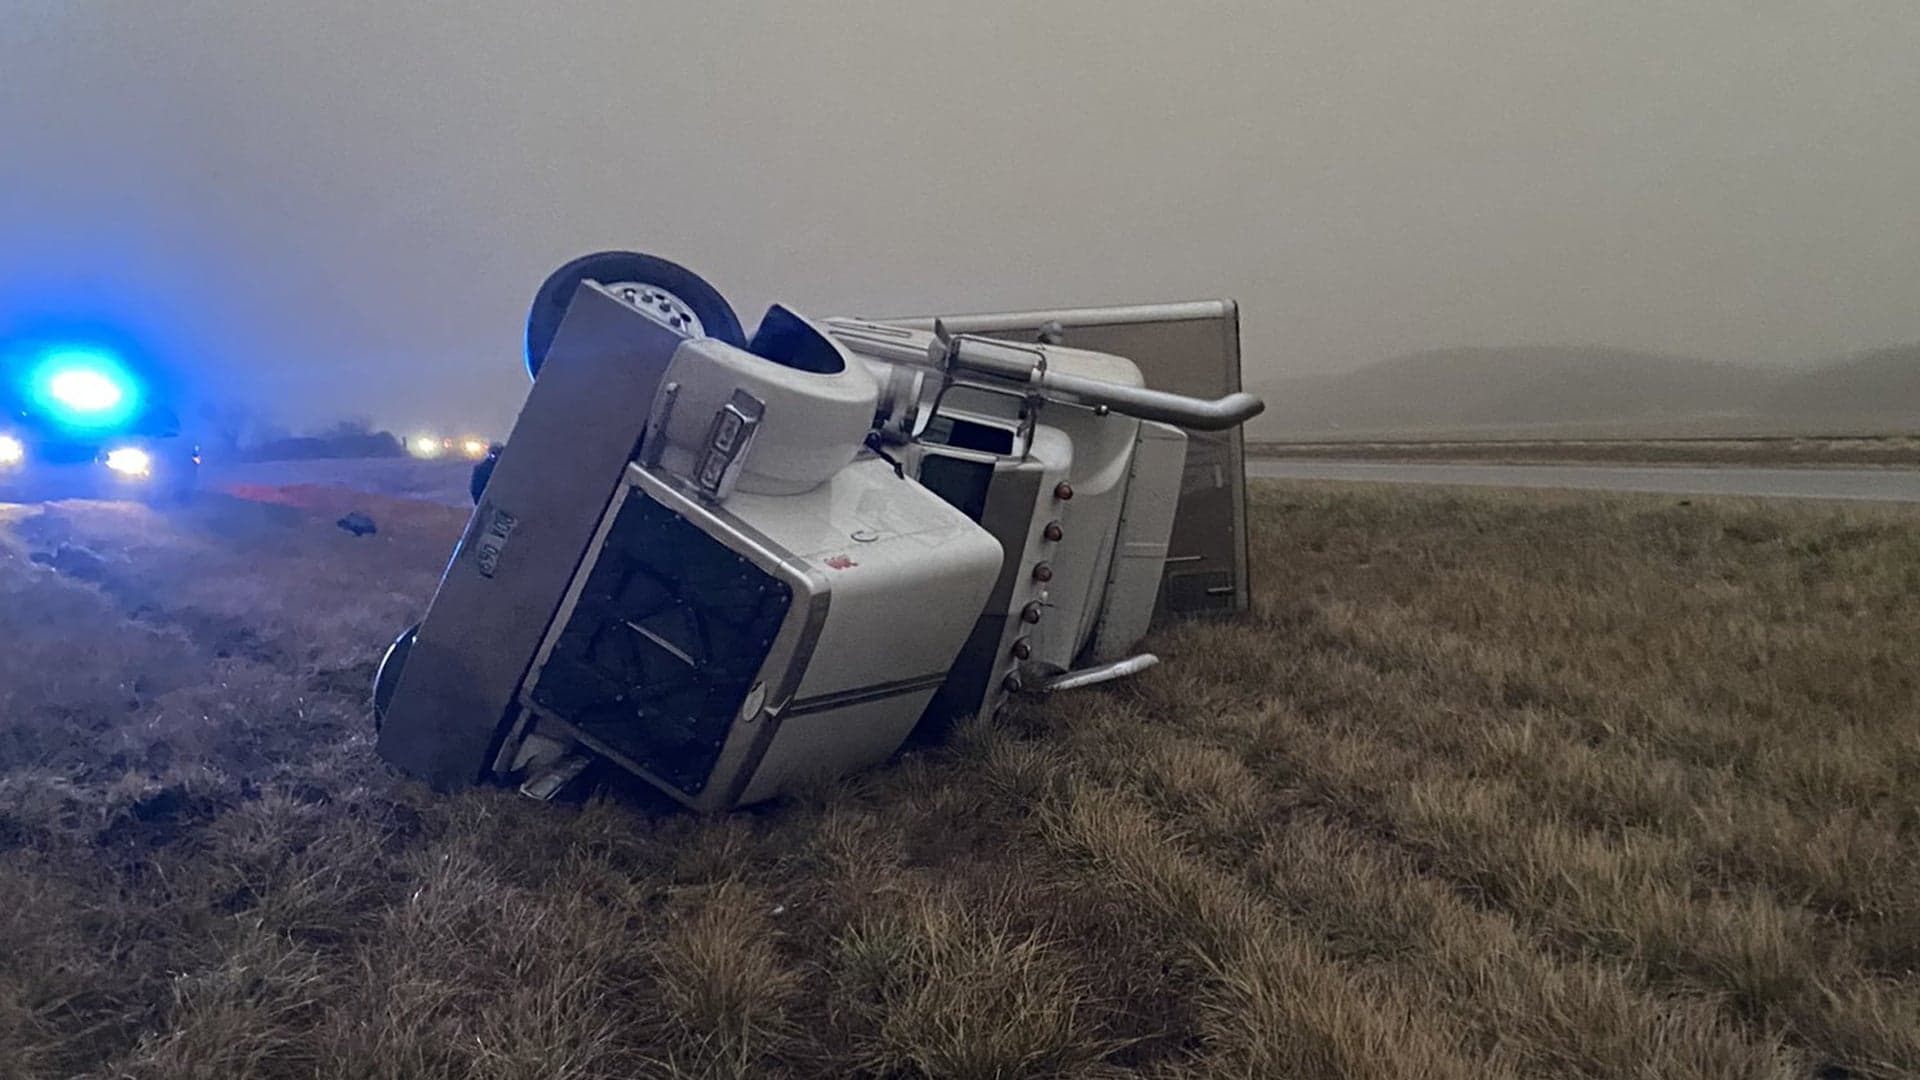 Semi-Trucks Toppled Across Midwest by Rare Hurricane Force Winds